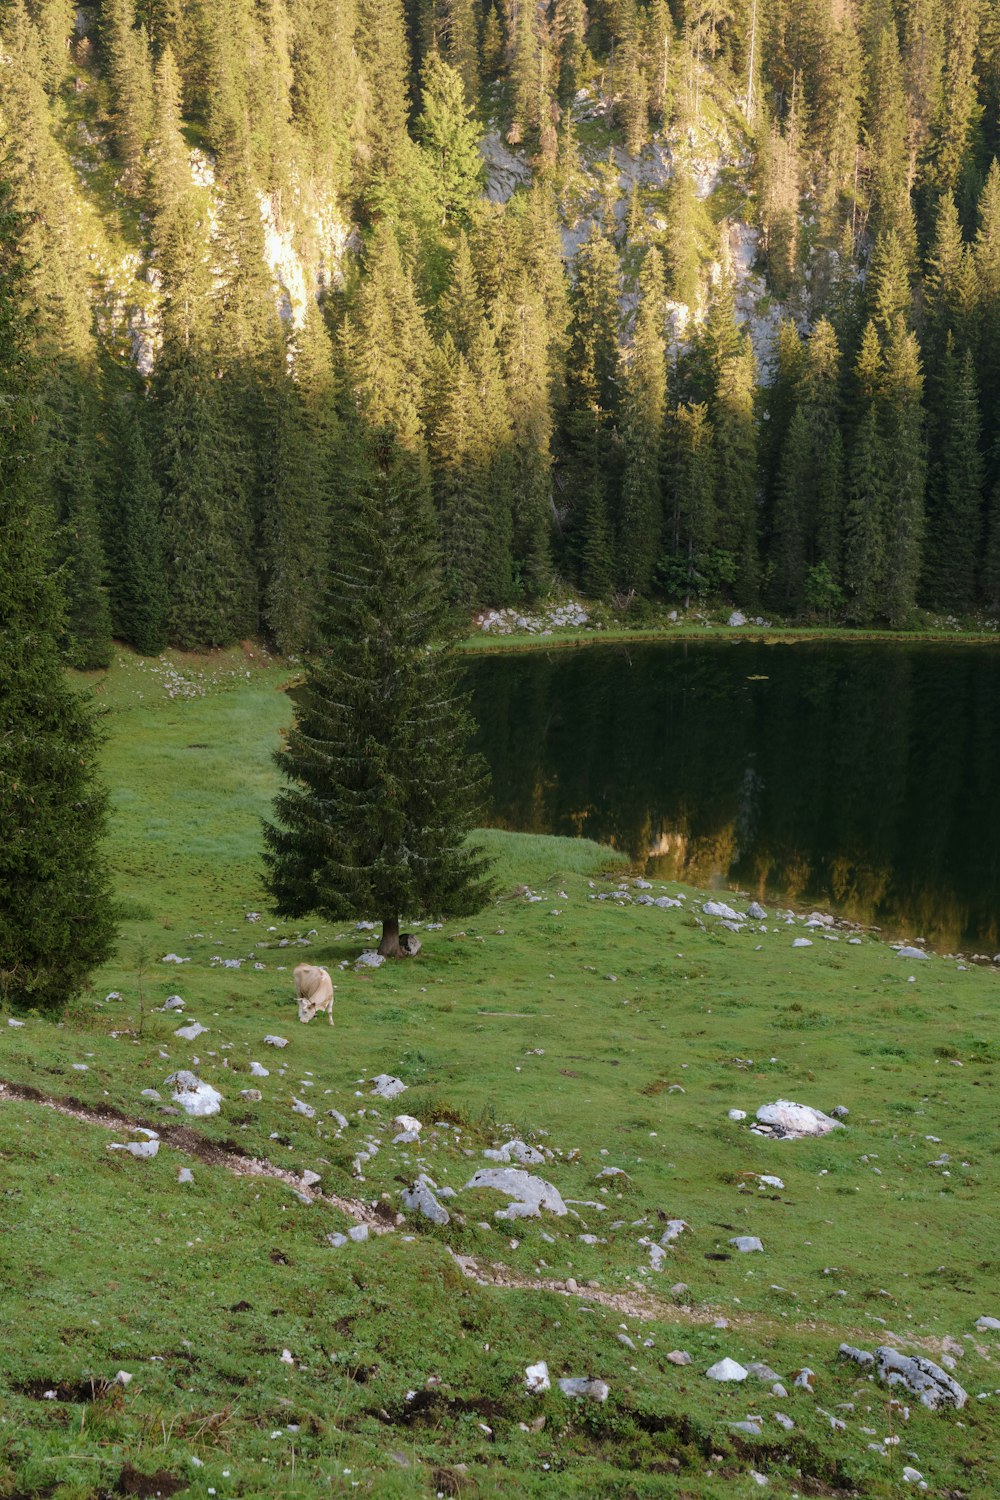 a cow standing on a lush green hillside next to a lake